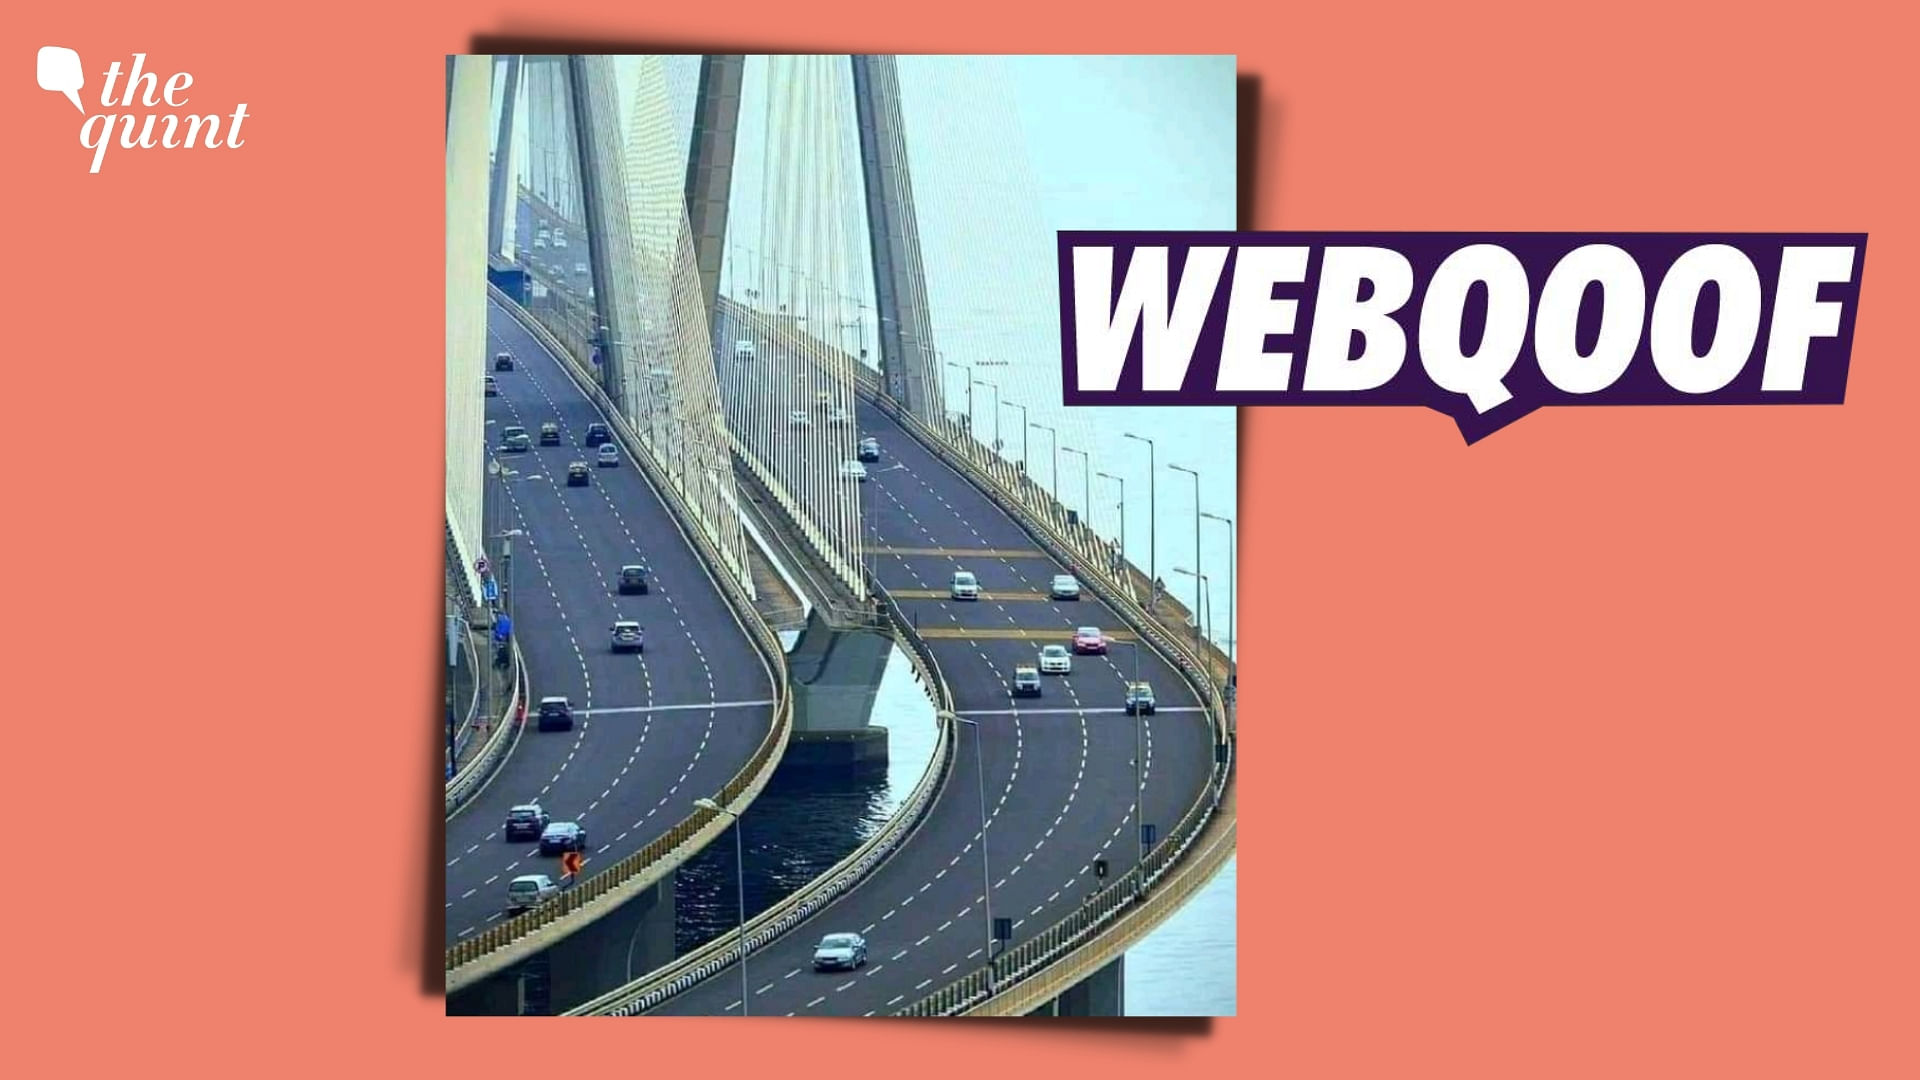 <div class="paragraphs"><p>The caption in the viral image claims that PM Modi is to be credited for making the Bandra-Worli Sea Link.</p></div>